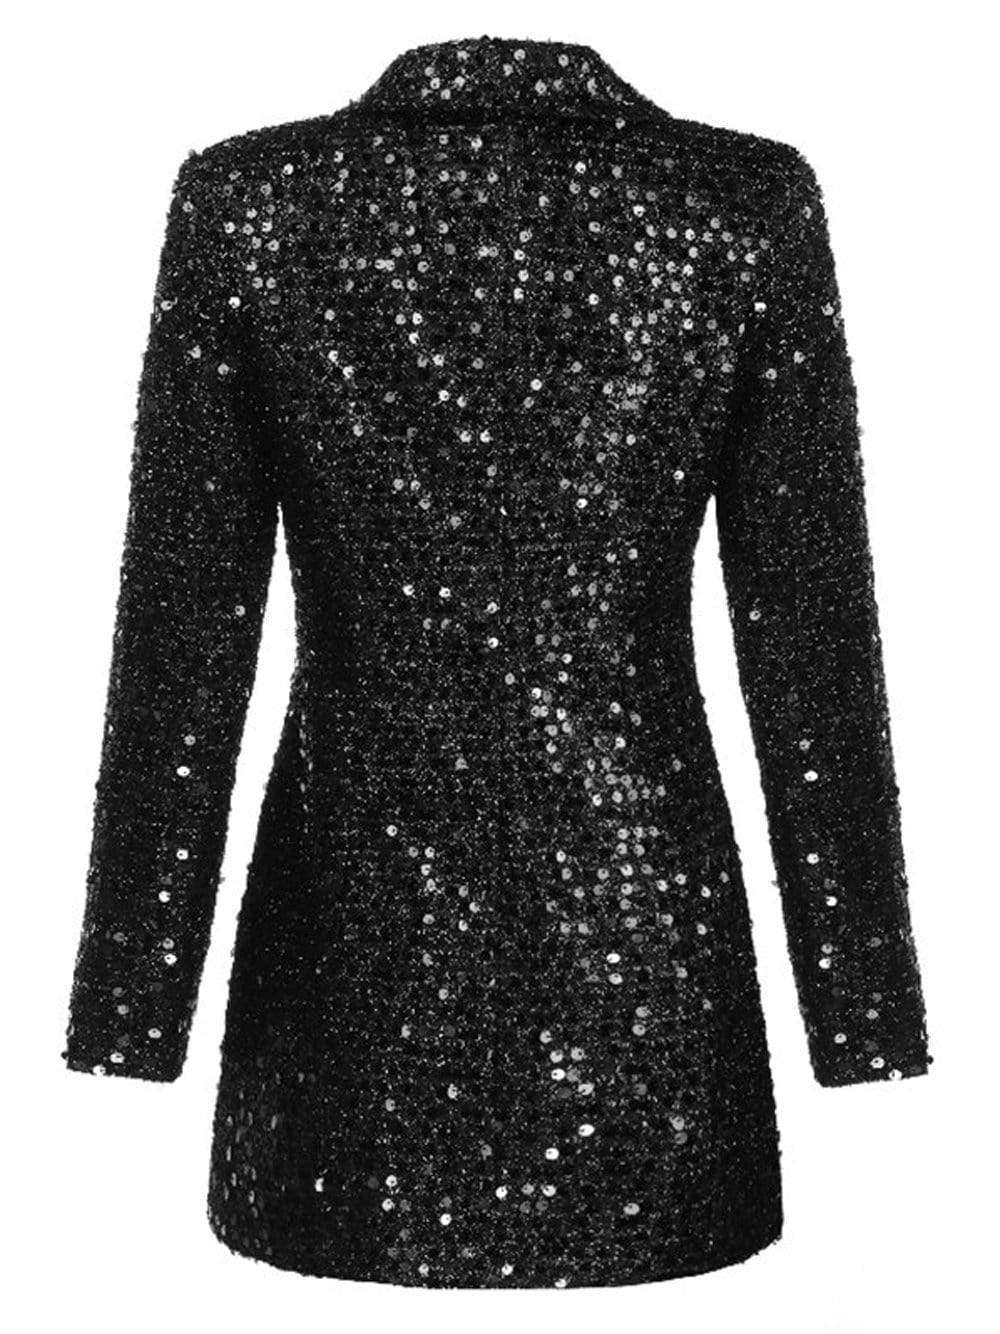 GF Double-Breasted Sequins Blazer Dress